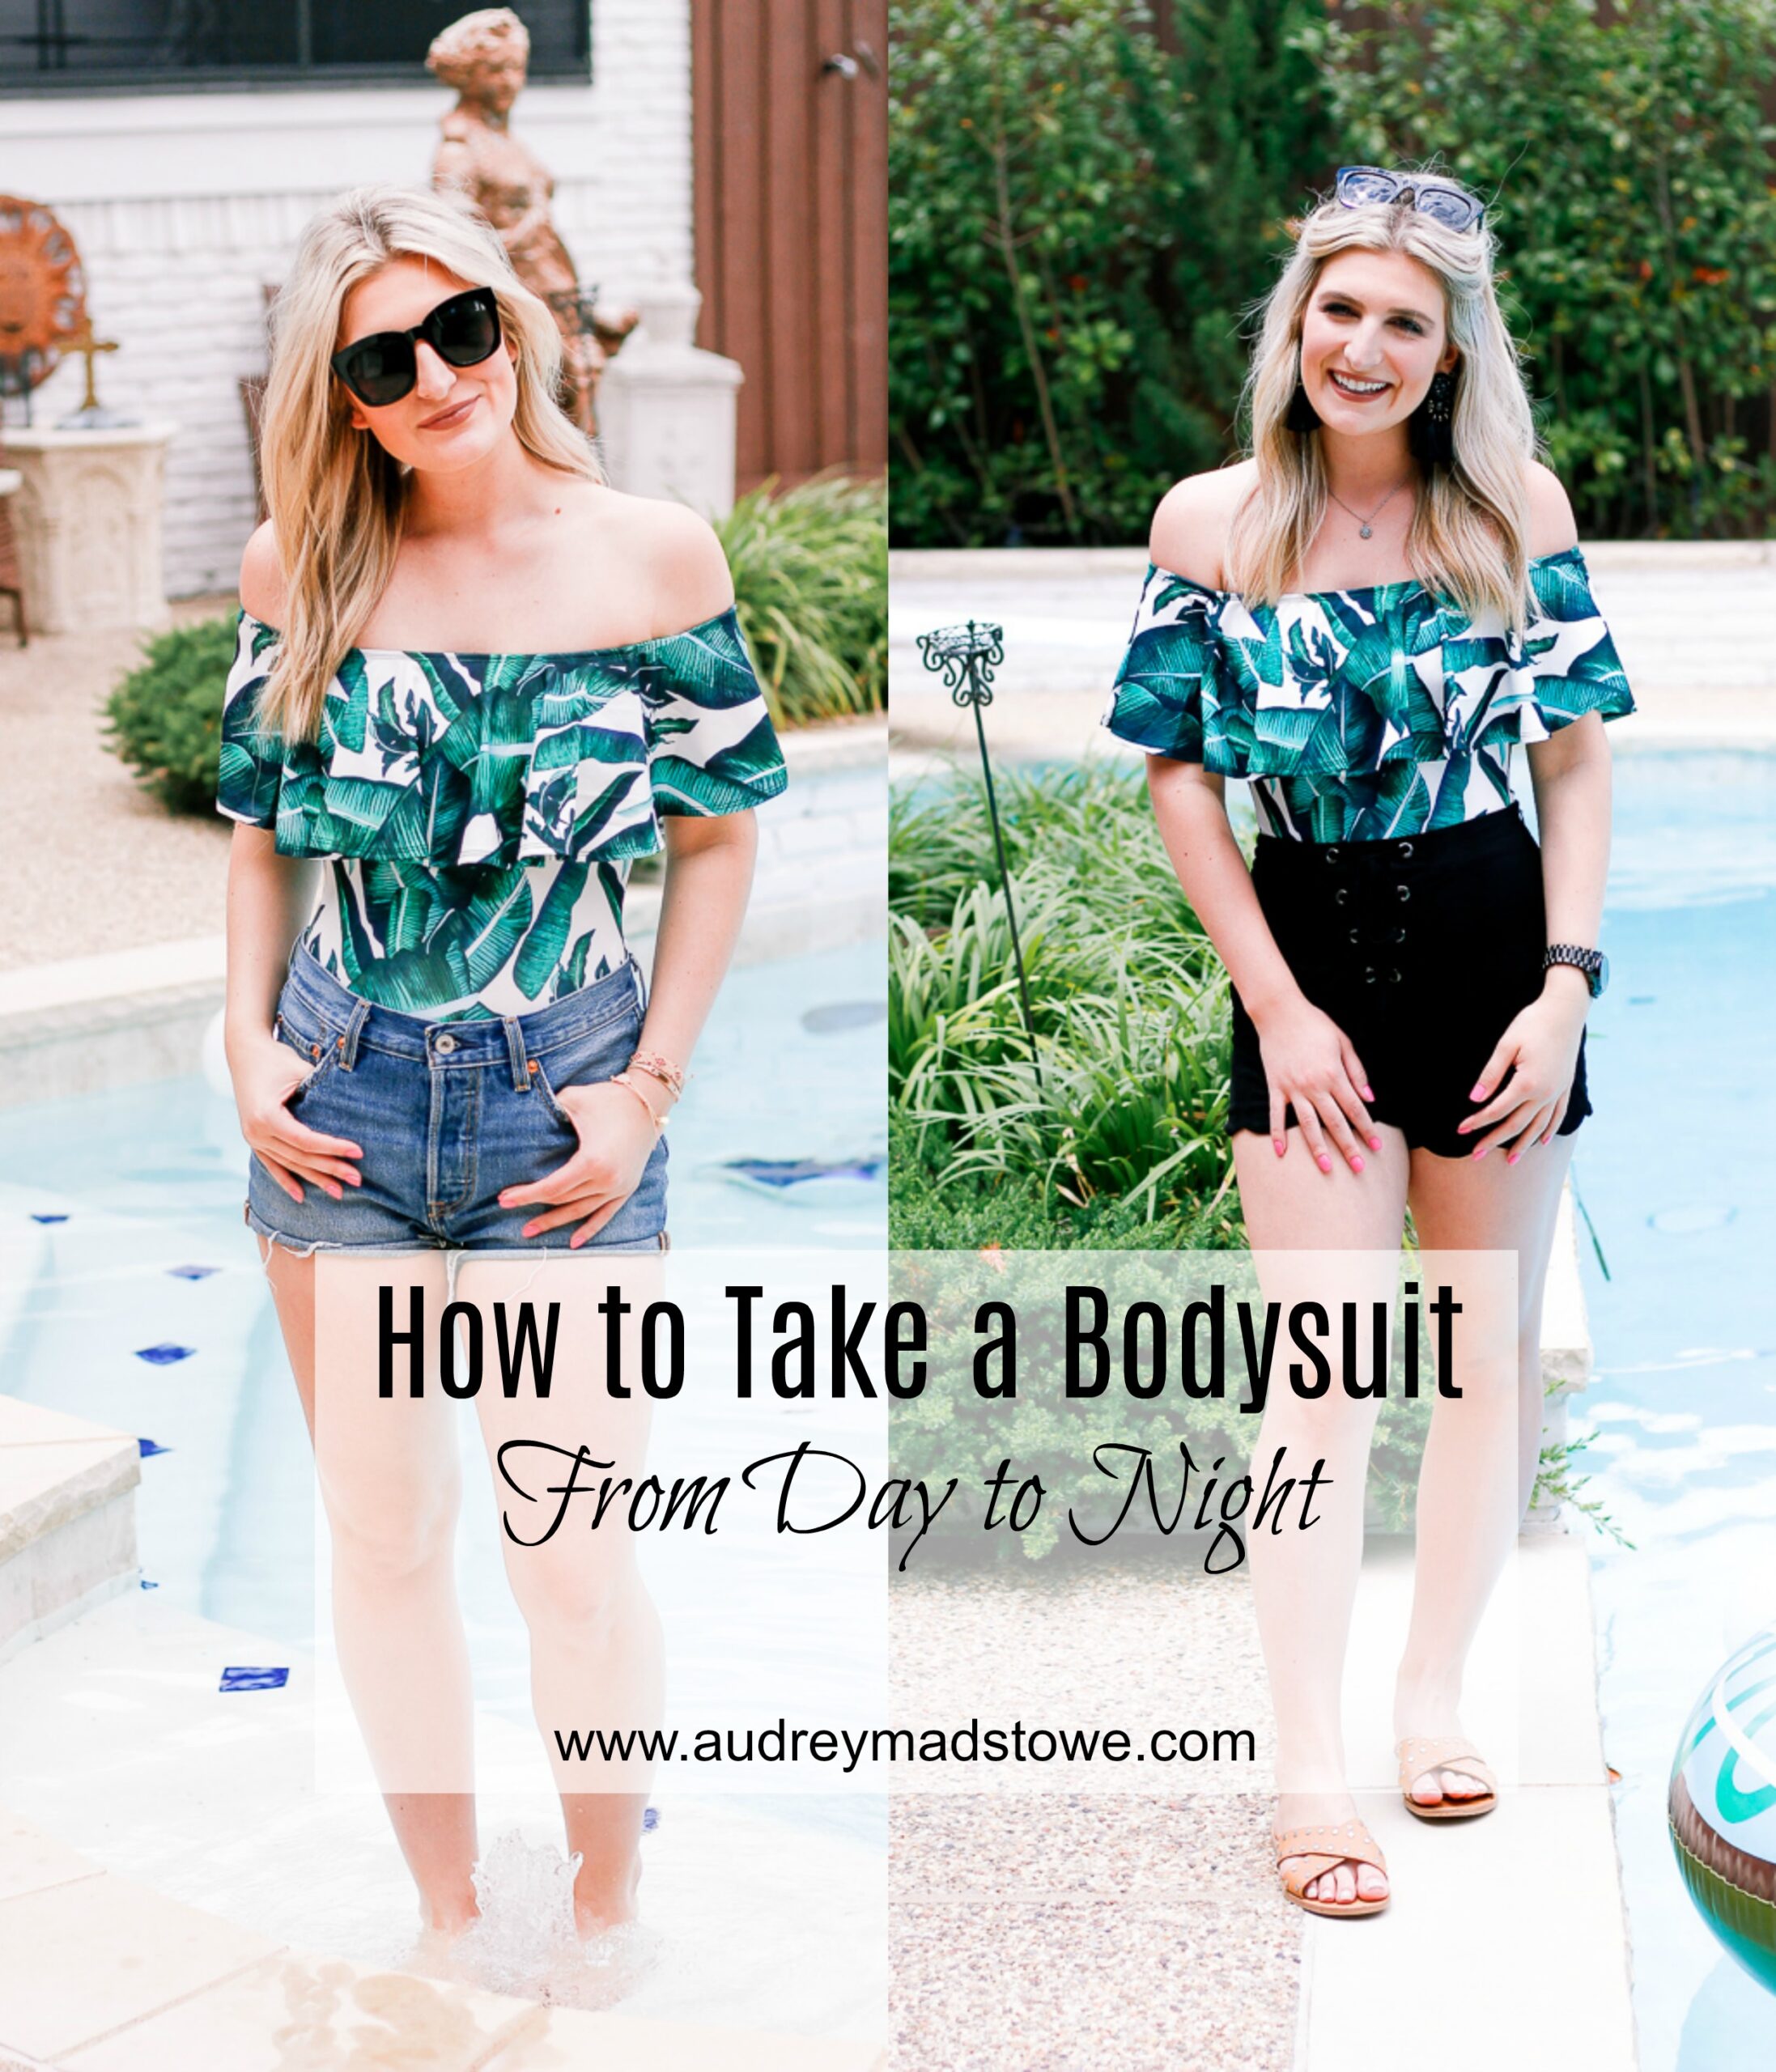 How To Take a Bodysuit from Day to Night | Shein style | Fashion and beauty blogger Audrey Madison Stowe